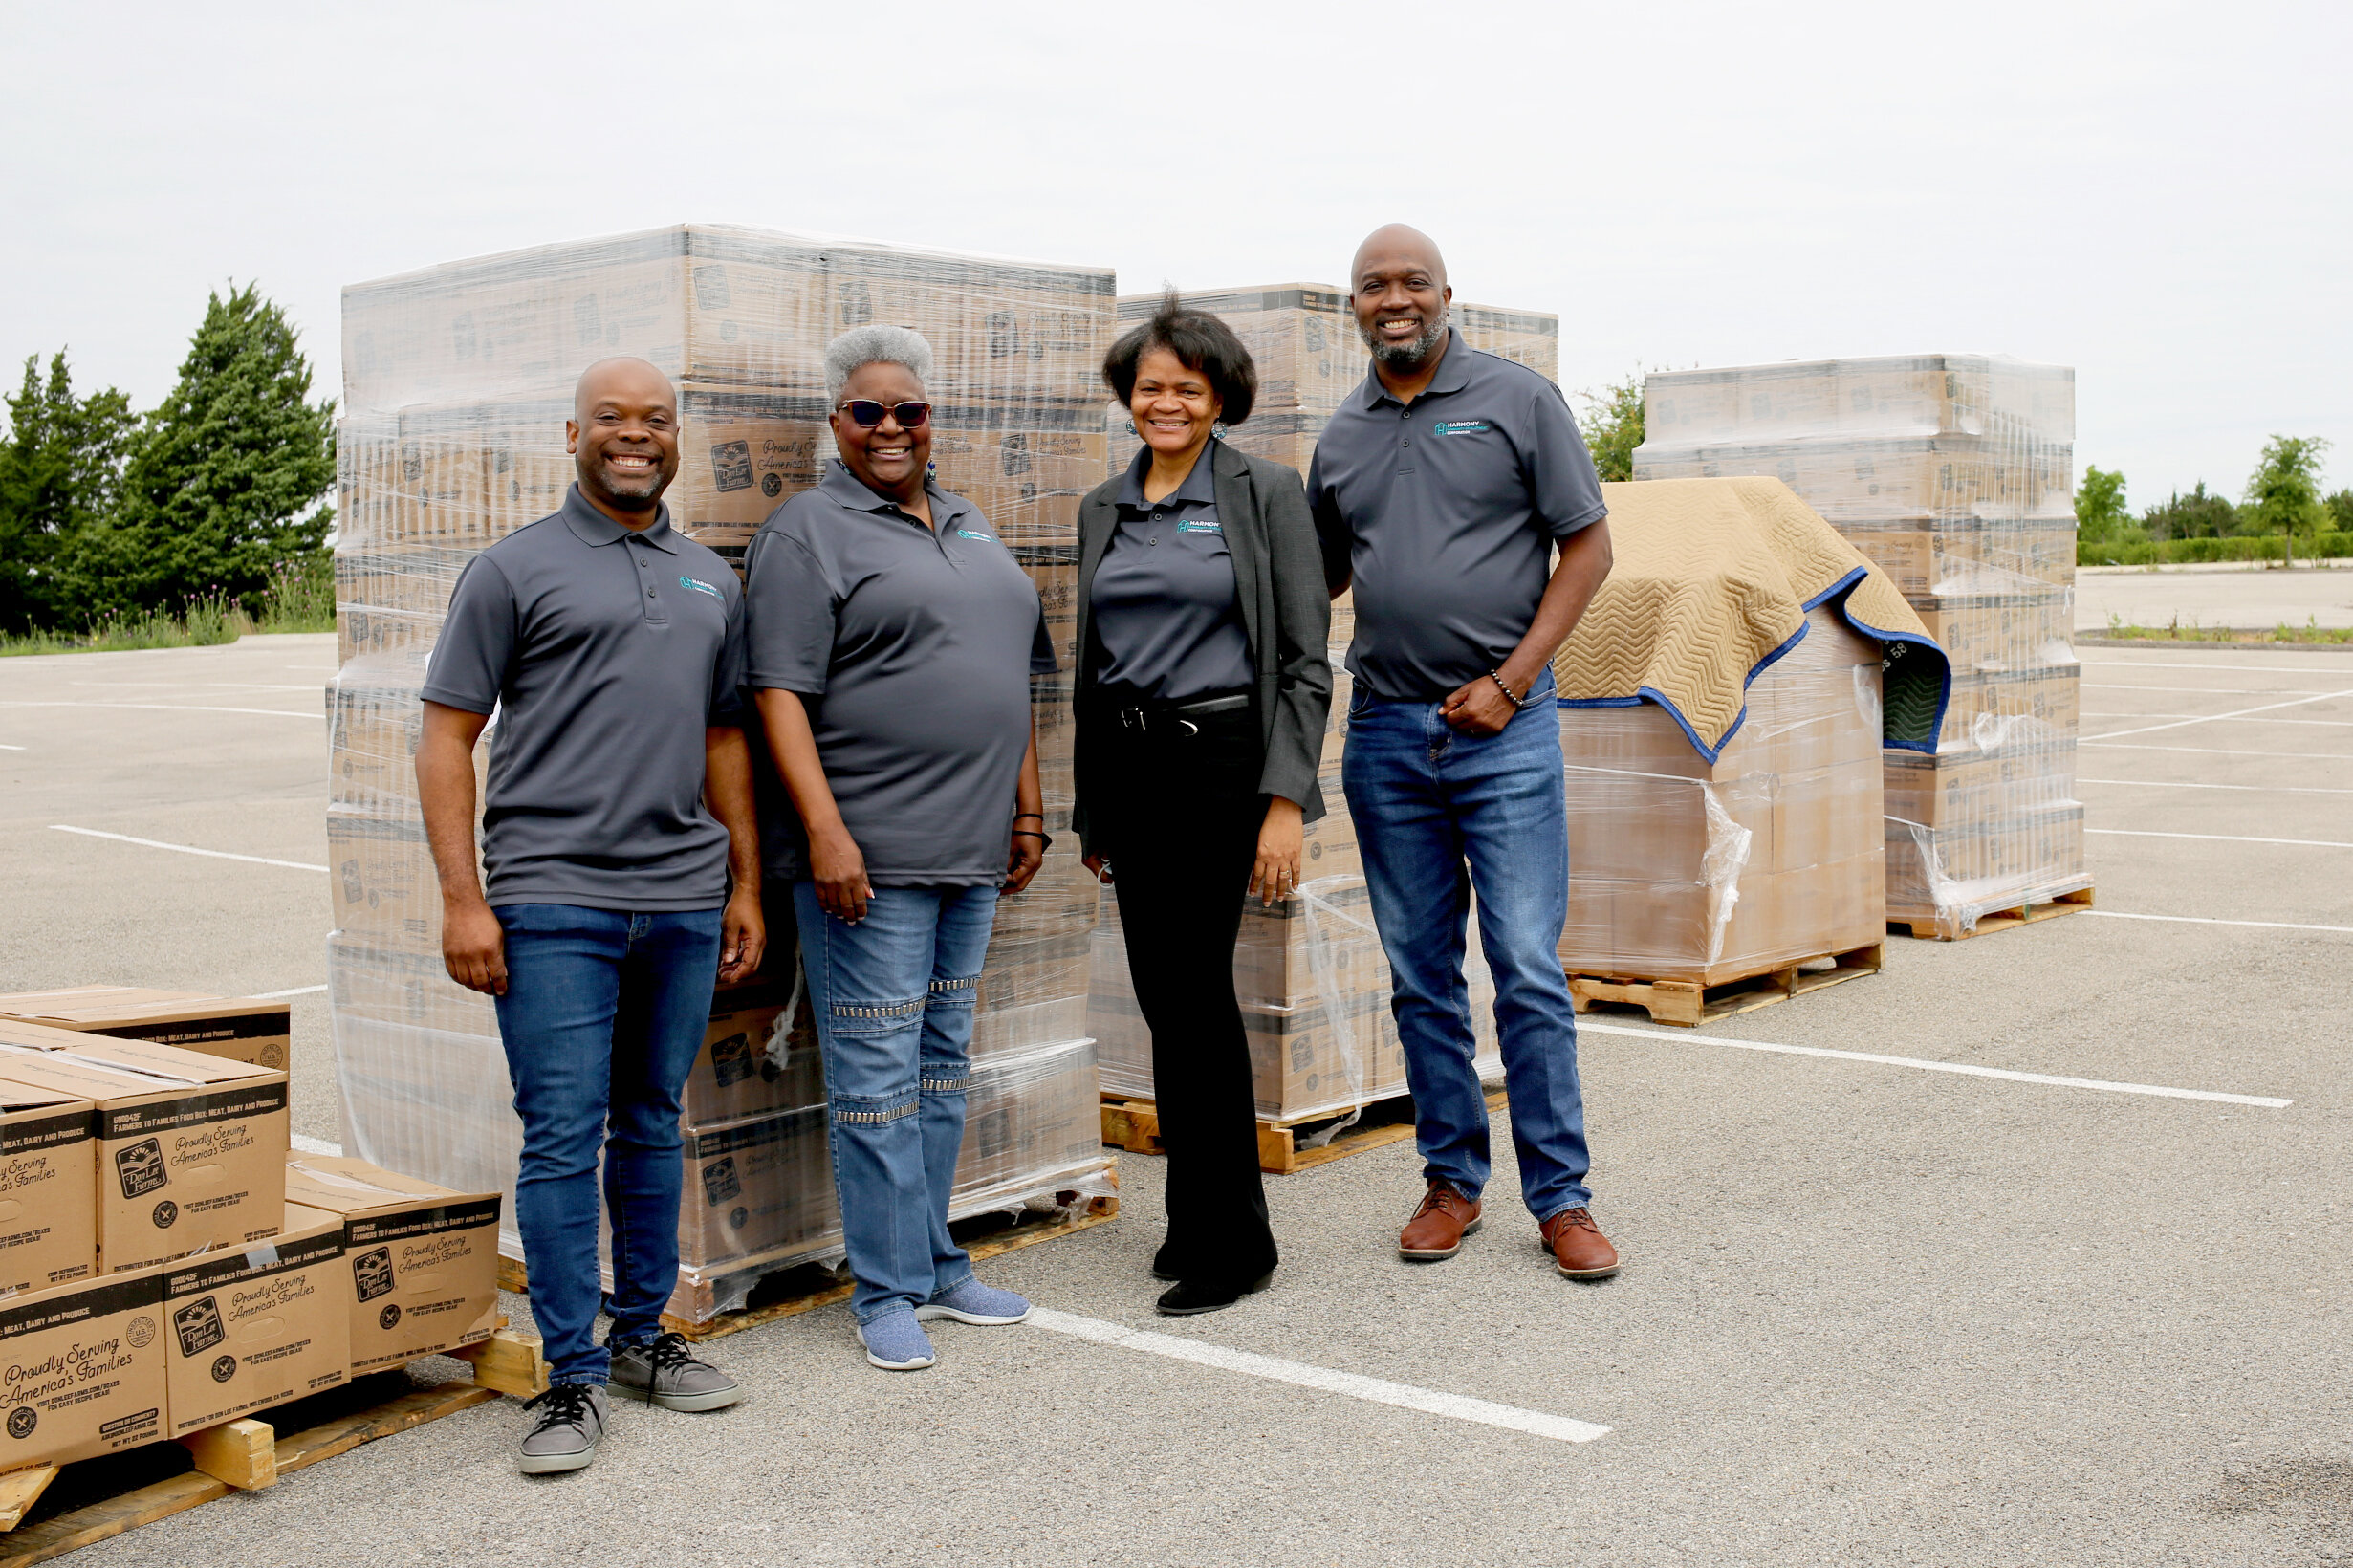 Harmony CDC staff at a food distribution event.